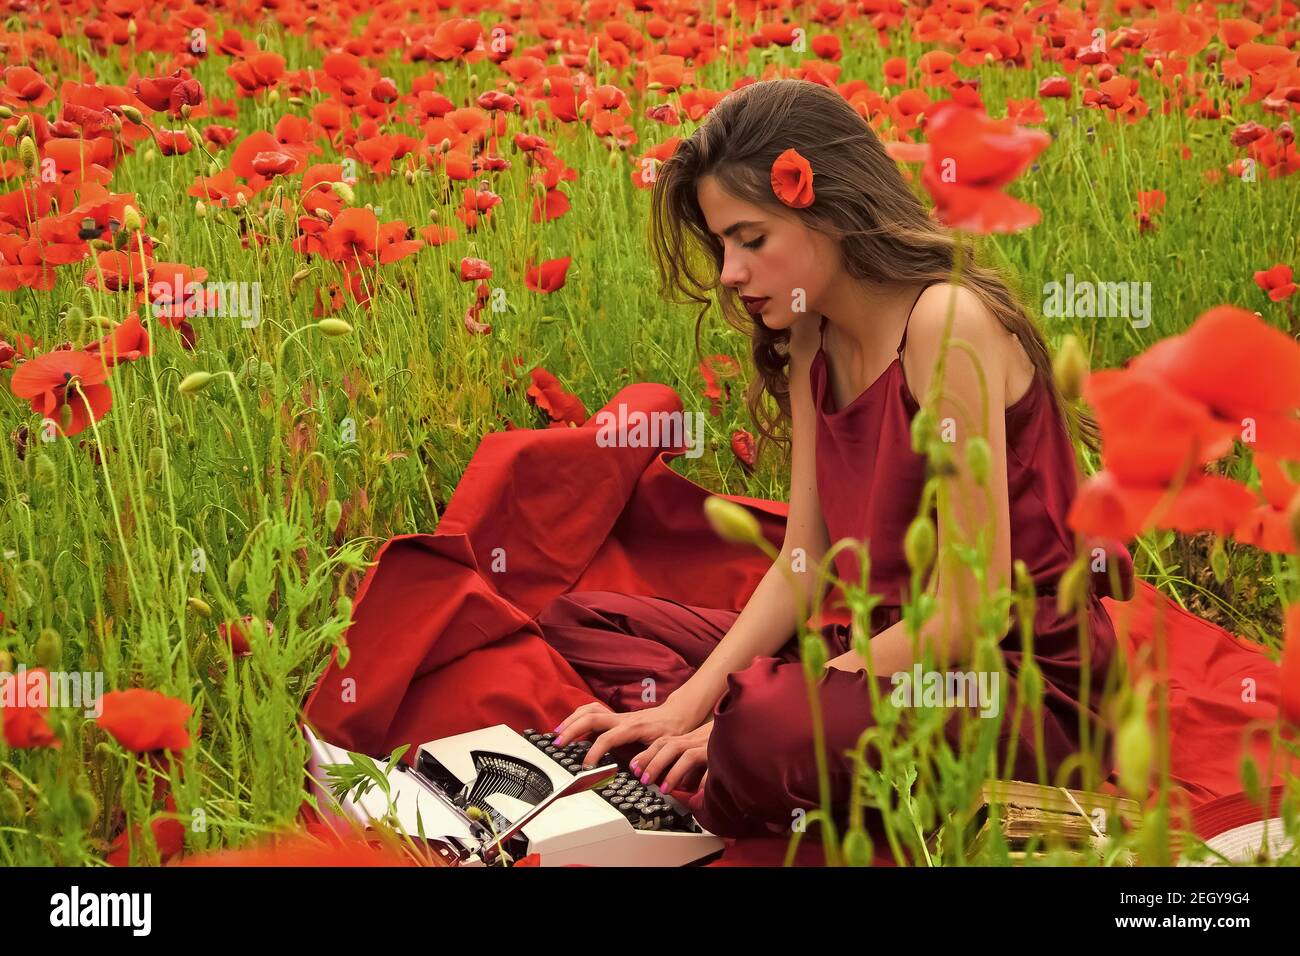 Woman with typewriter, camera, book. Poppy, Remembrance or Anzac Day. Woman writer in poppy flower field. Stock Photo